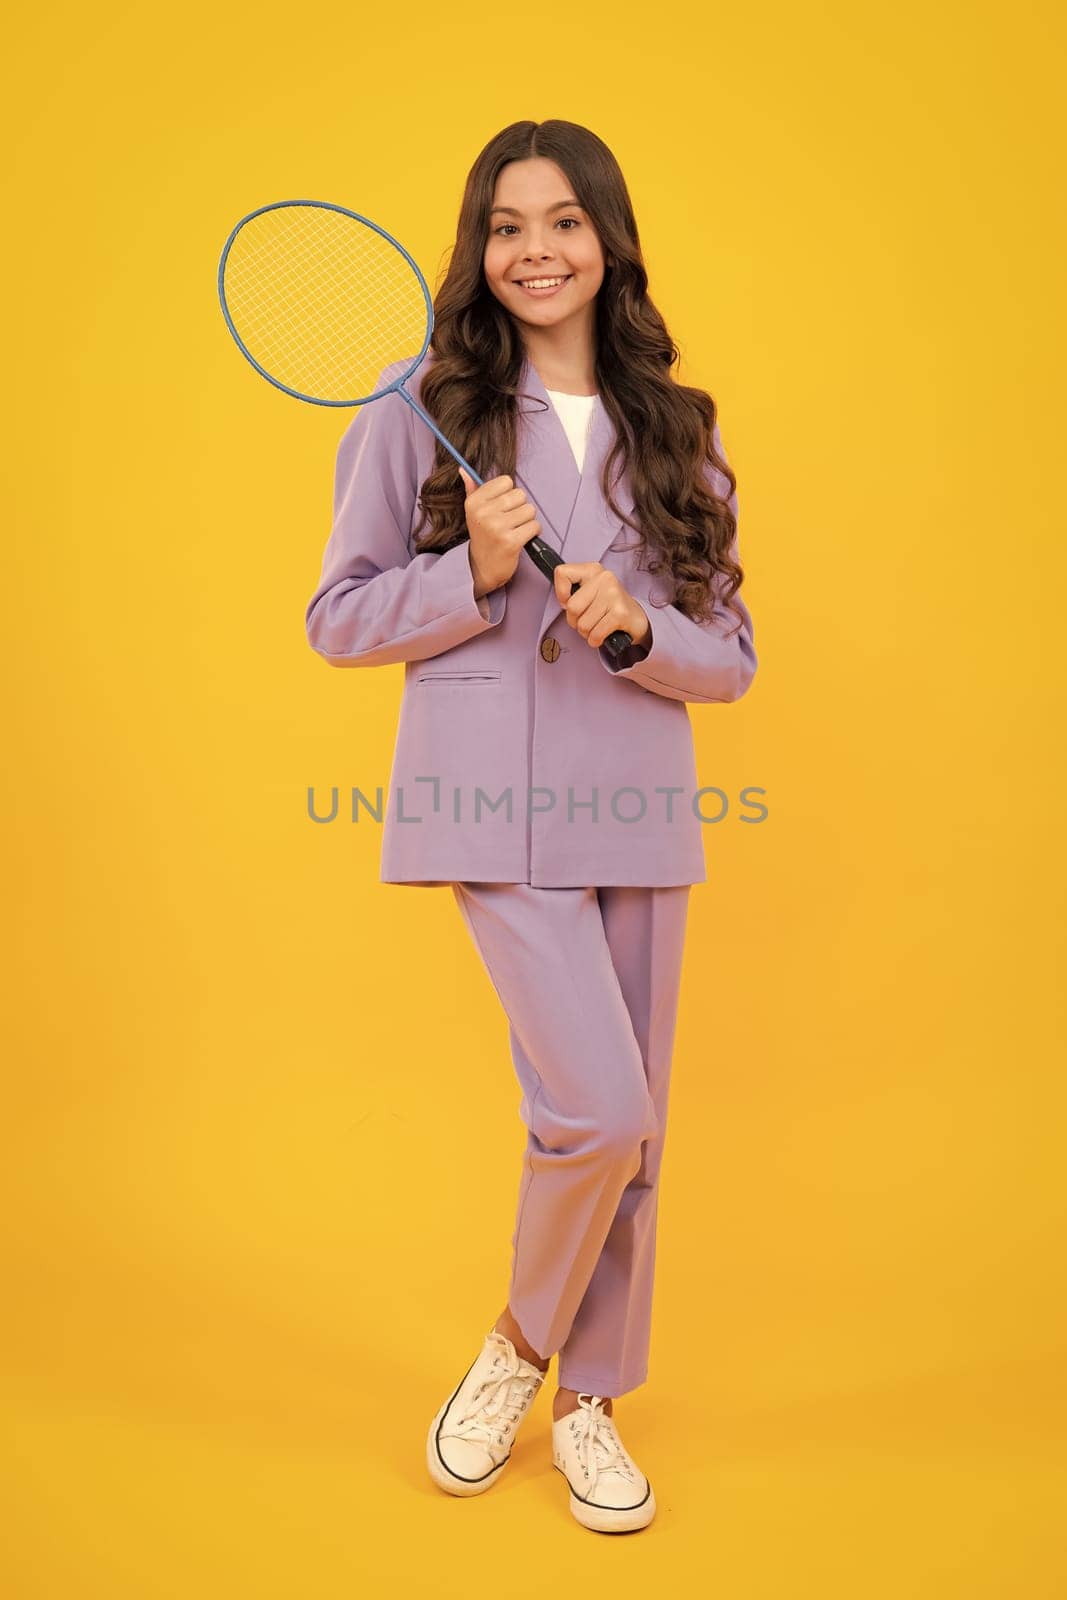 Teen girl badminton player in suit with badminton racket isolated on yellow background. by RedFoxStudio